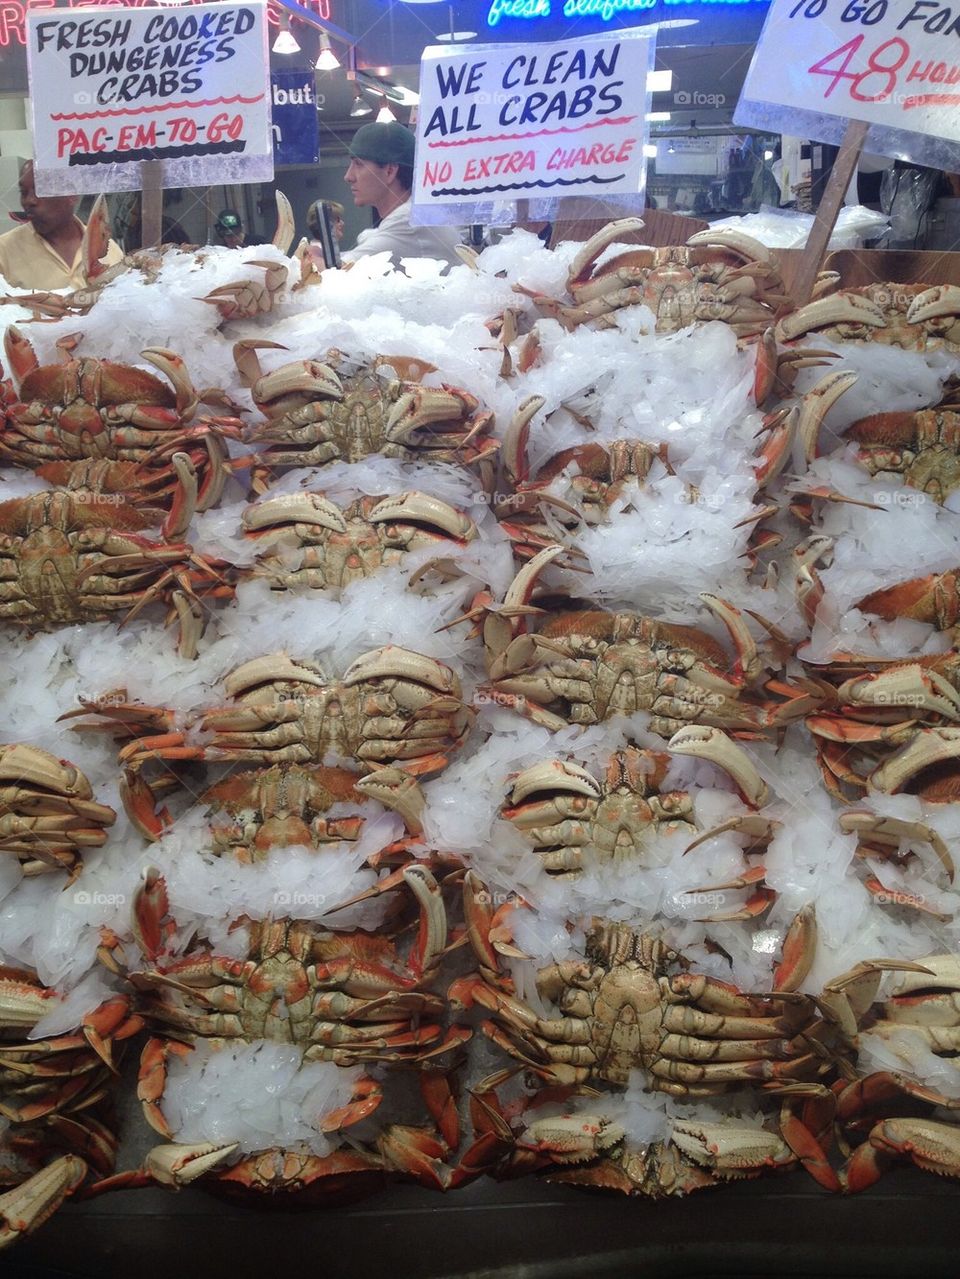 Rows of pacific crab